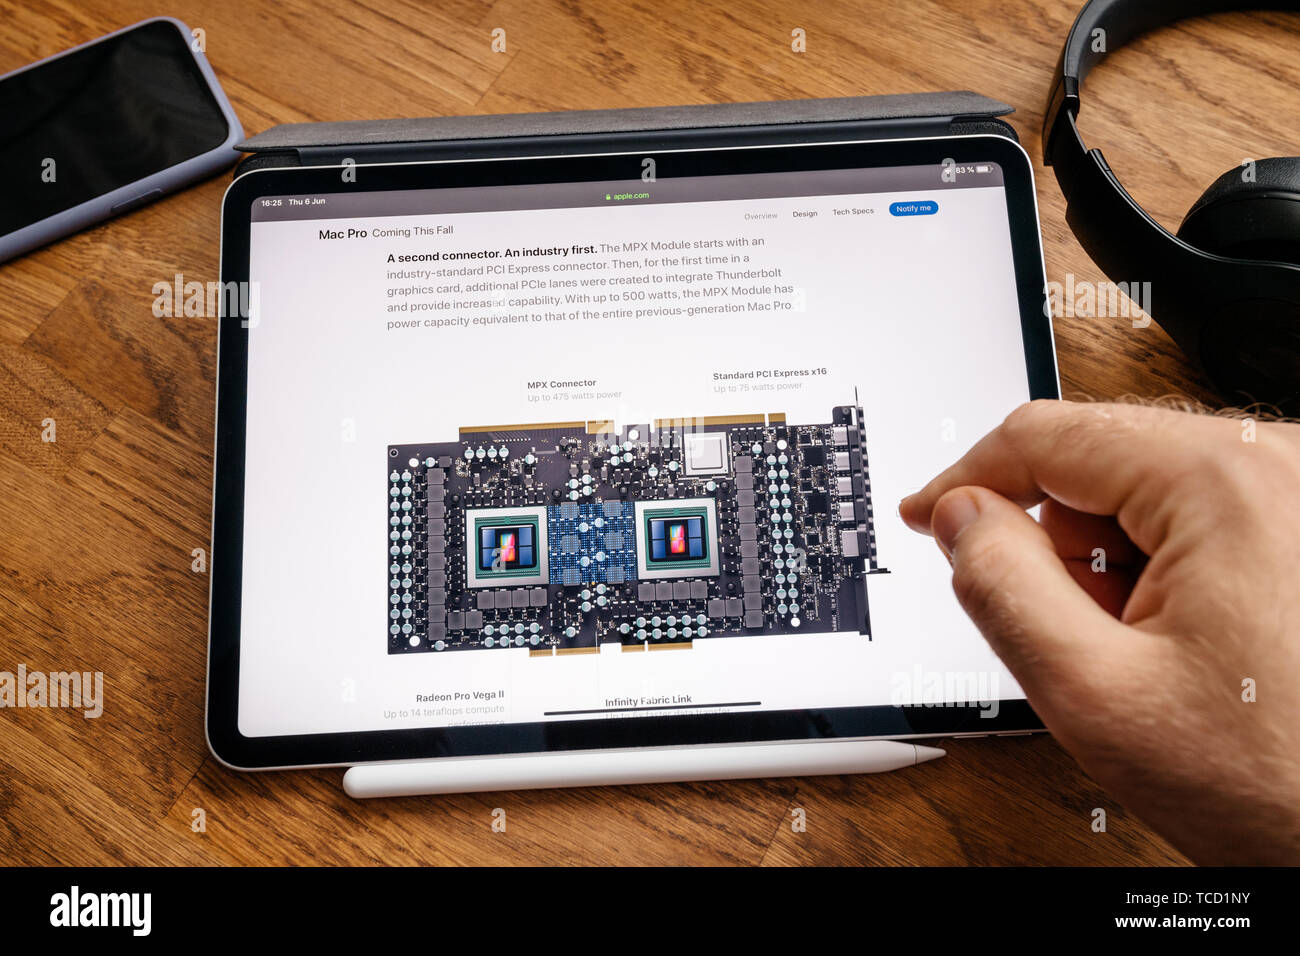 Paris, France - Jun 6, 2019: Man reading on Apple iPad Pro tablet about  latest announcement of at Developers Conference WWDC - showing the Mac Pro  workstation with MPX module example Stock Photo - Alamy